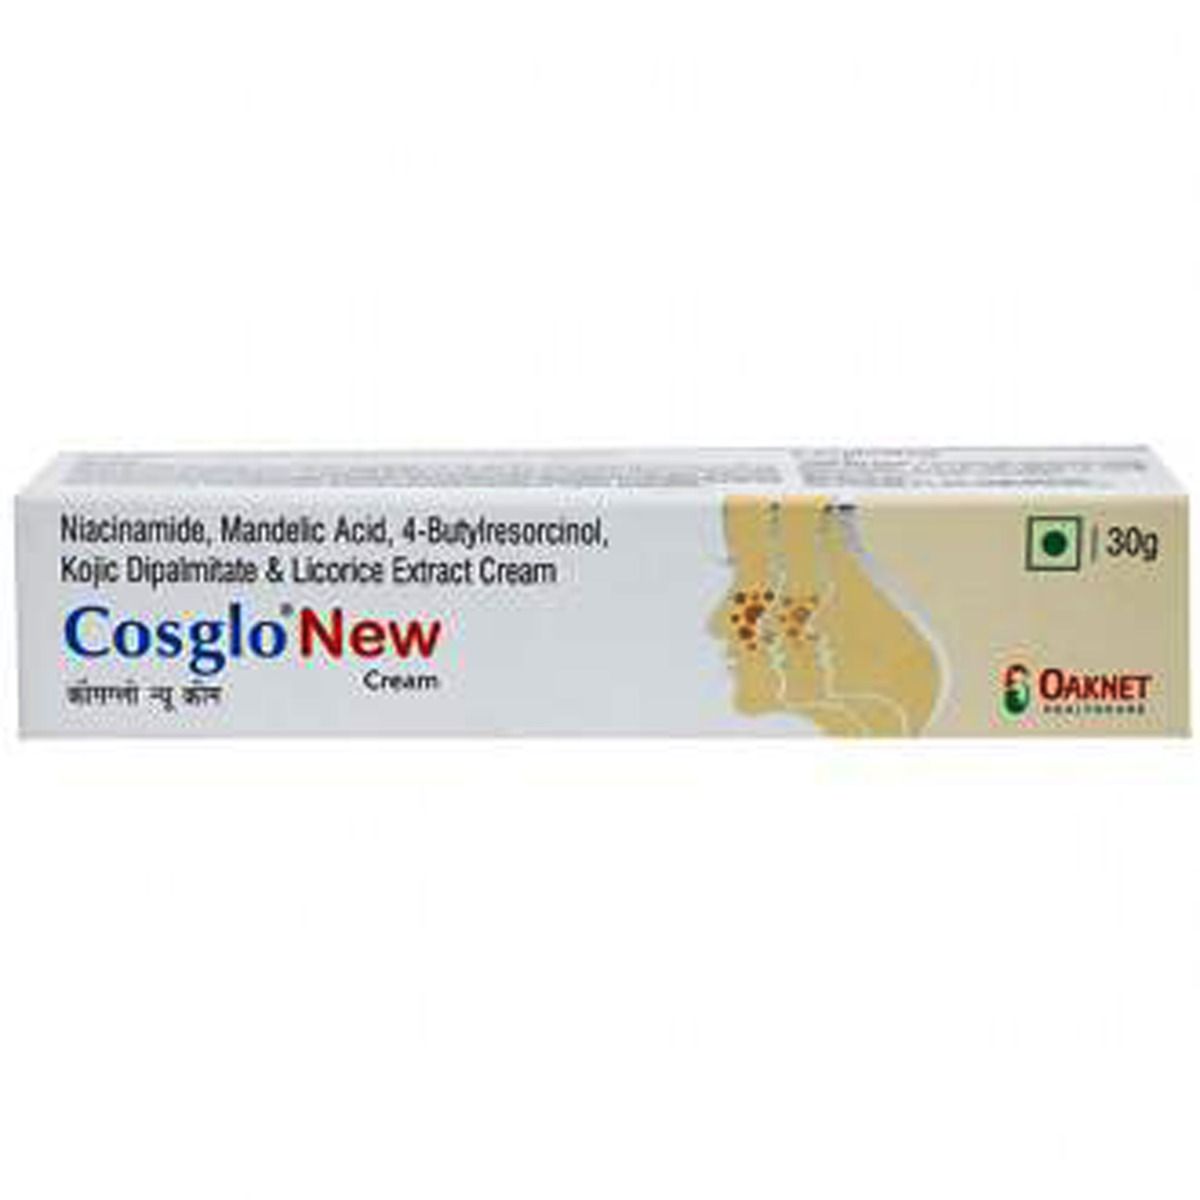 Cosglo New Cream 30gm, Pack of 1 